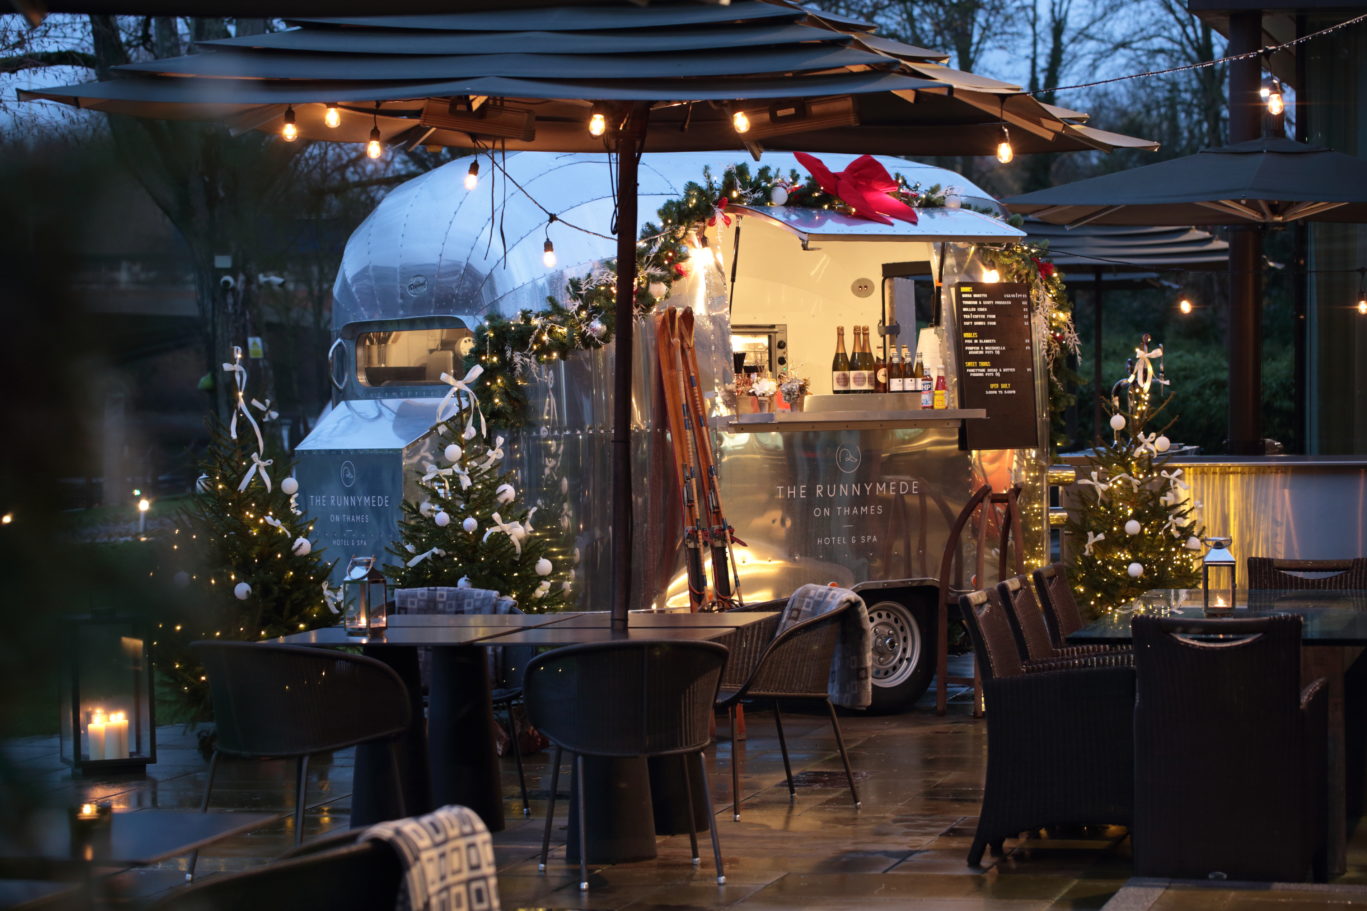 The Runnymede air stream at Christmas